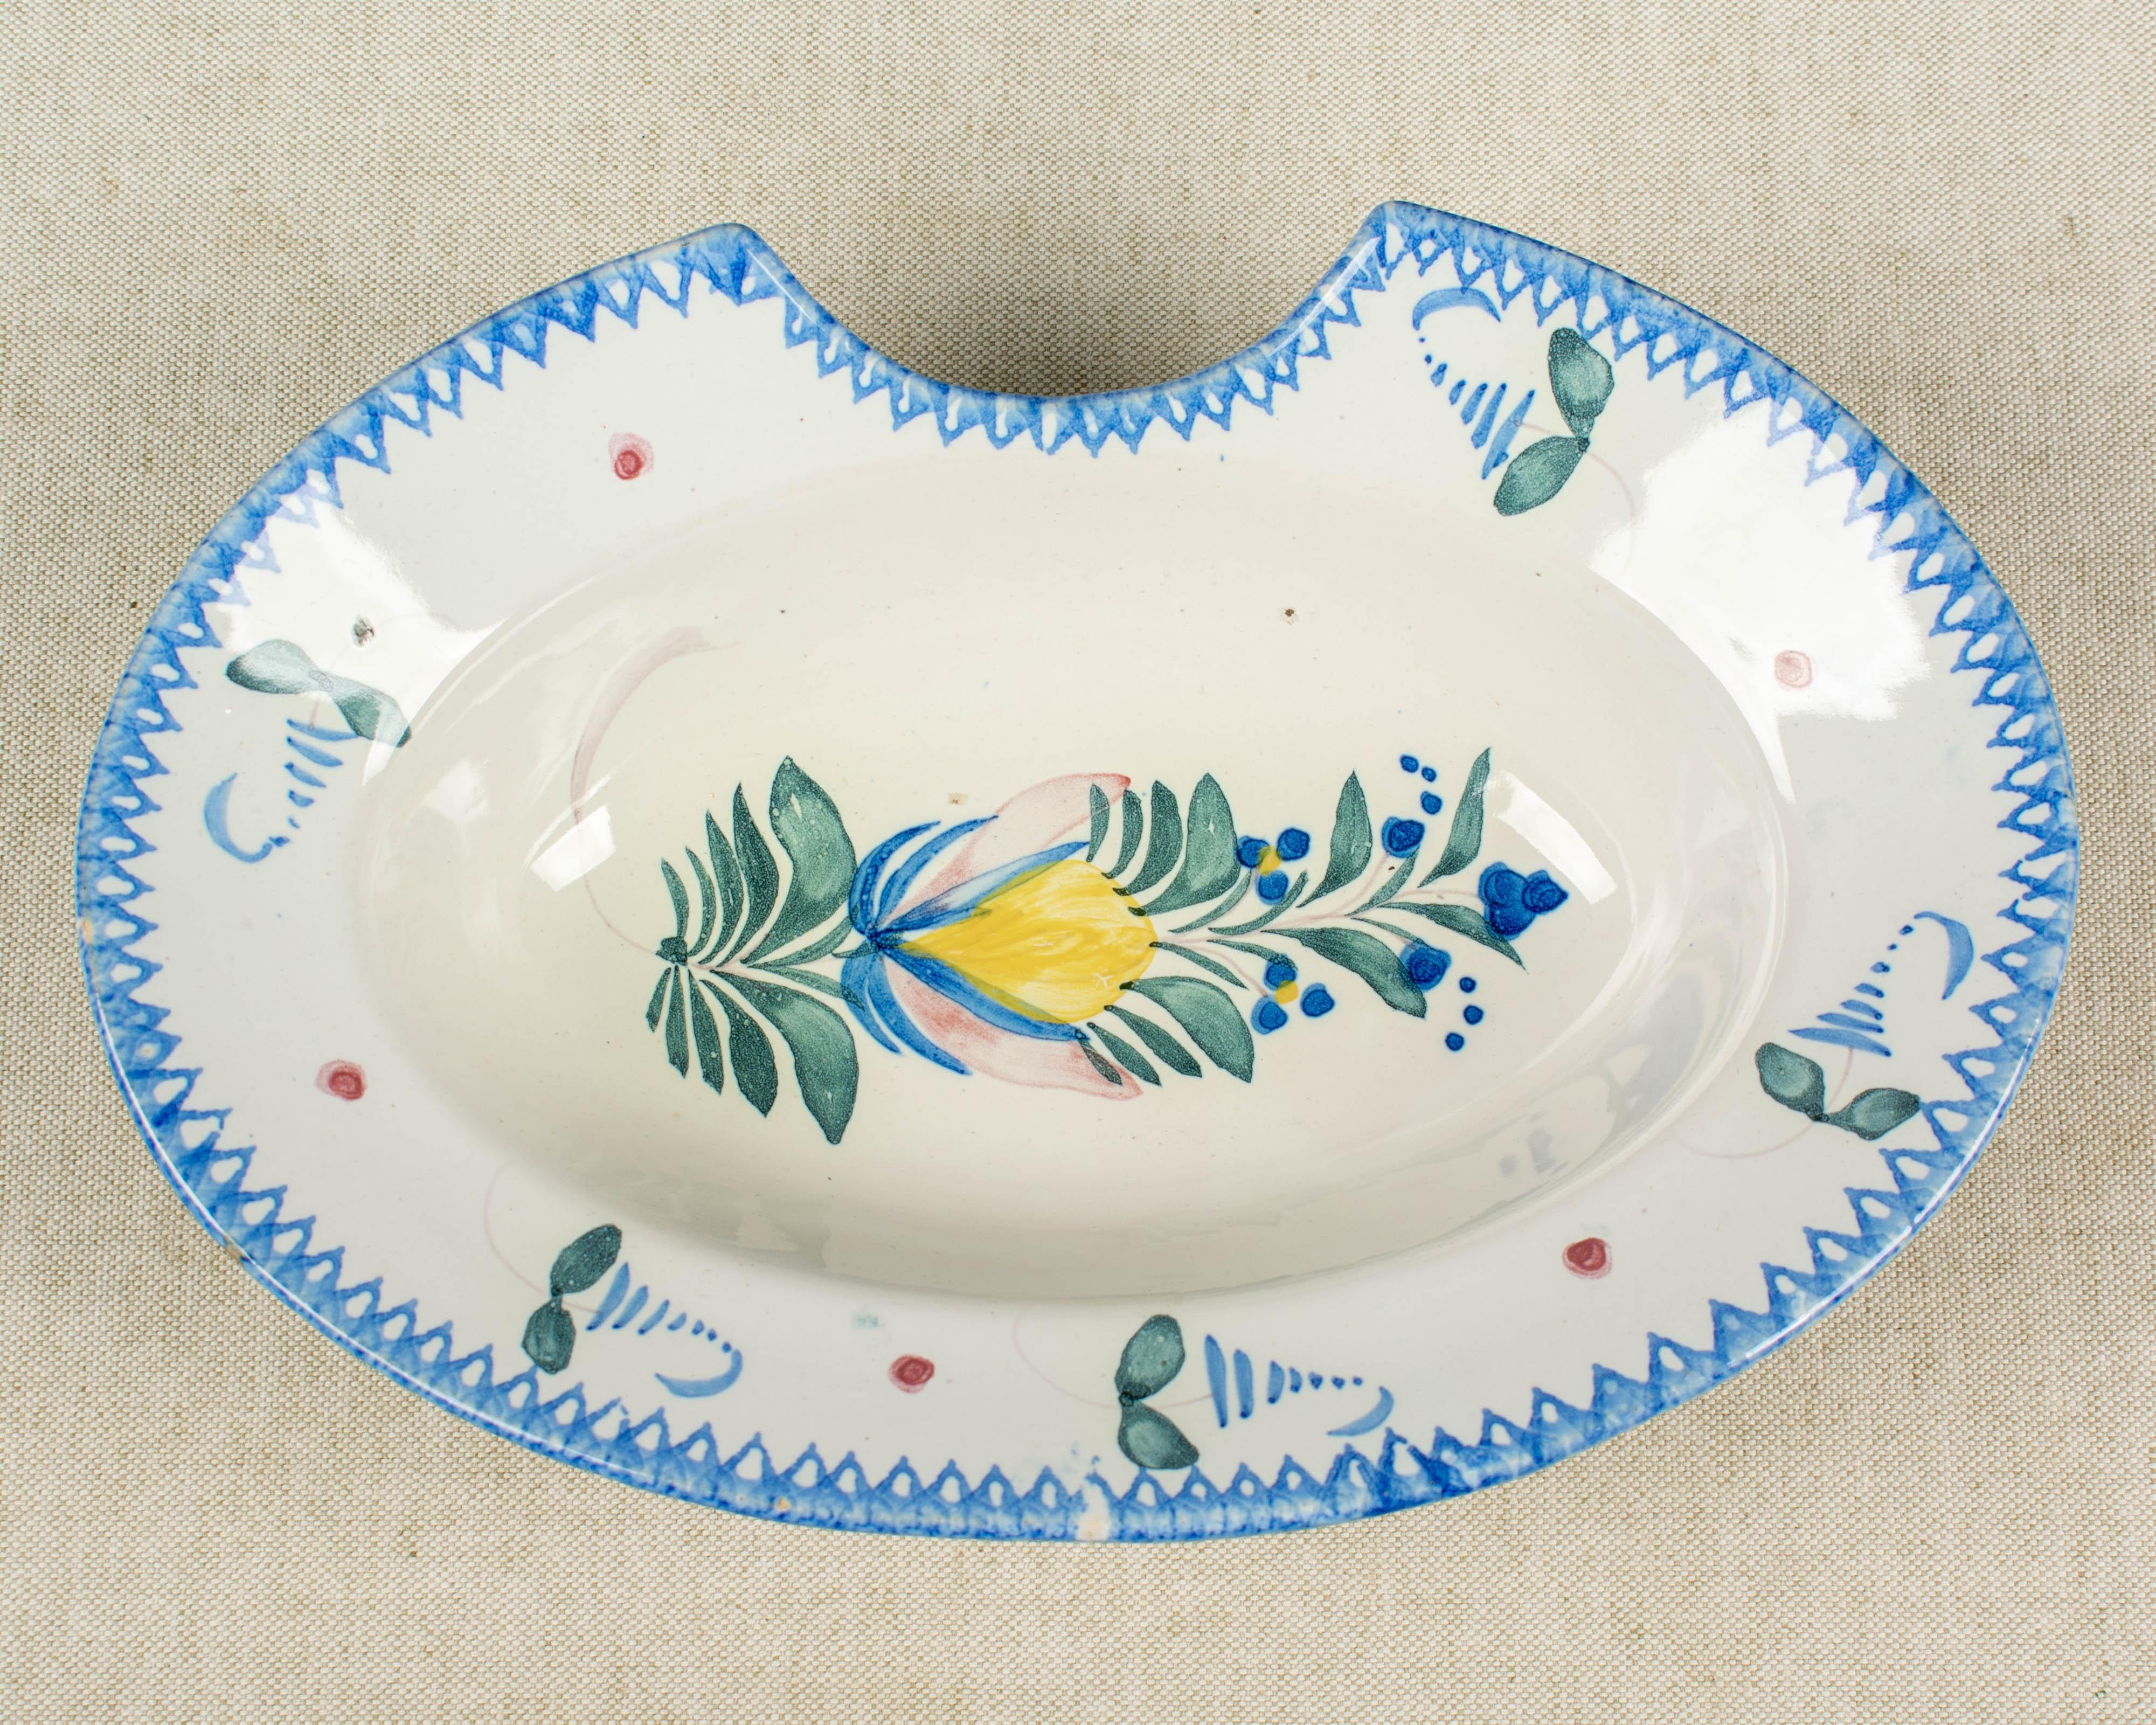 A French faience shaving bowl with hand-painted decoration in blue, green, yellow and pink. Rope on back for hanging.